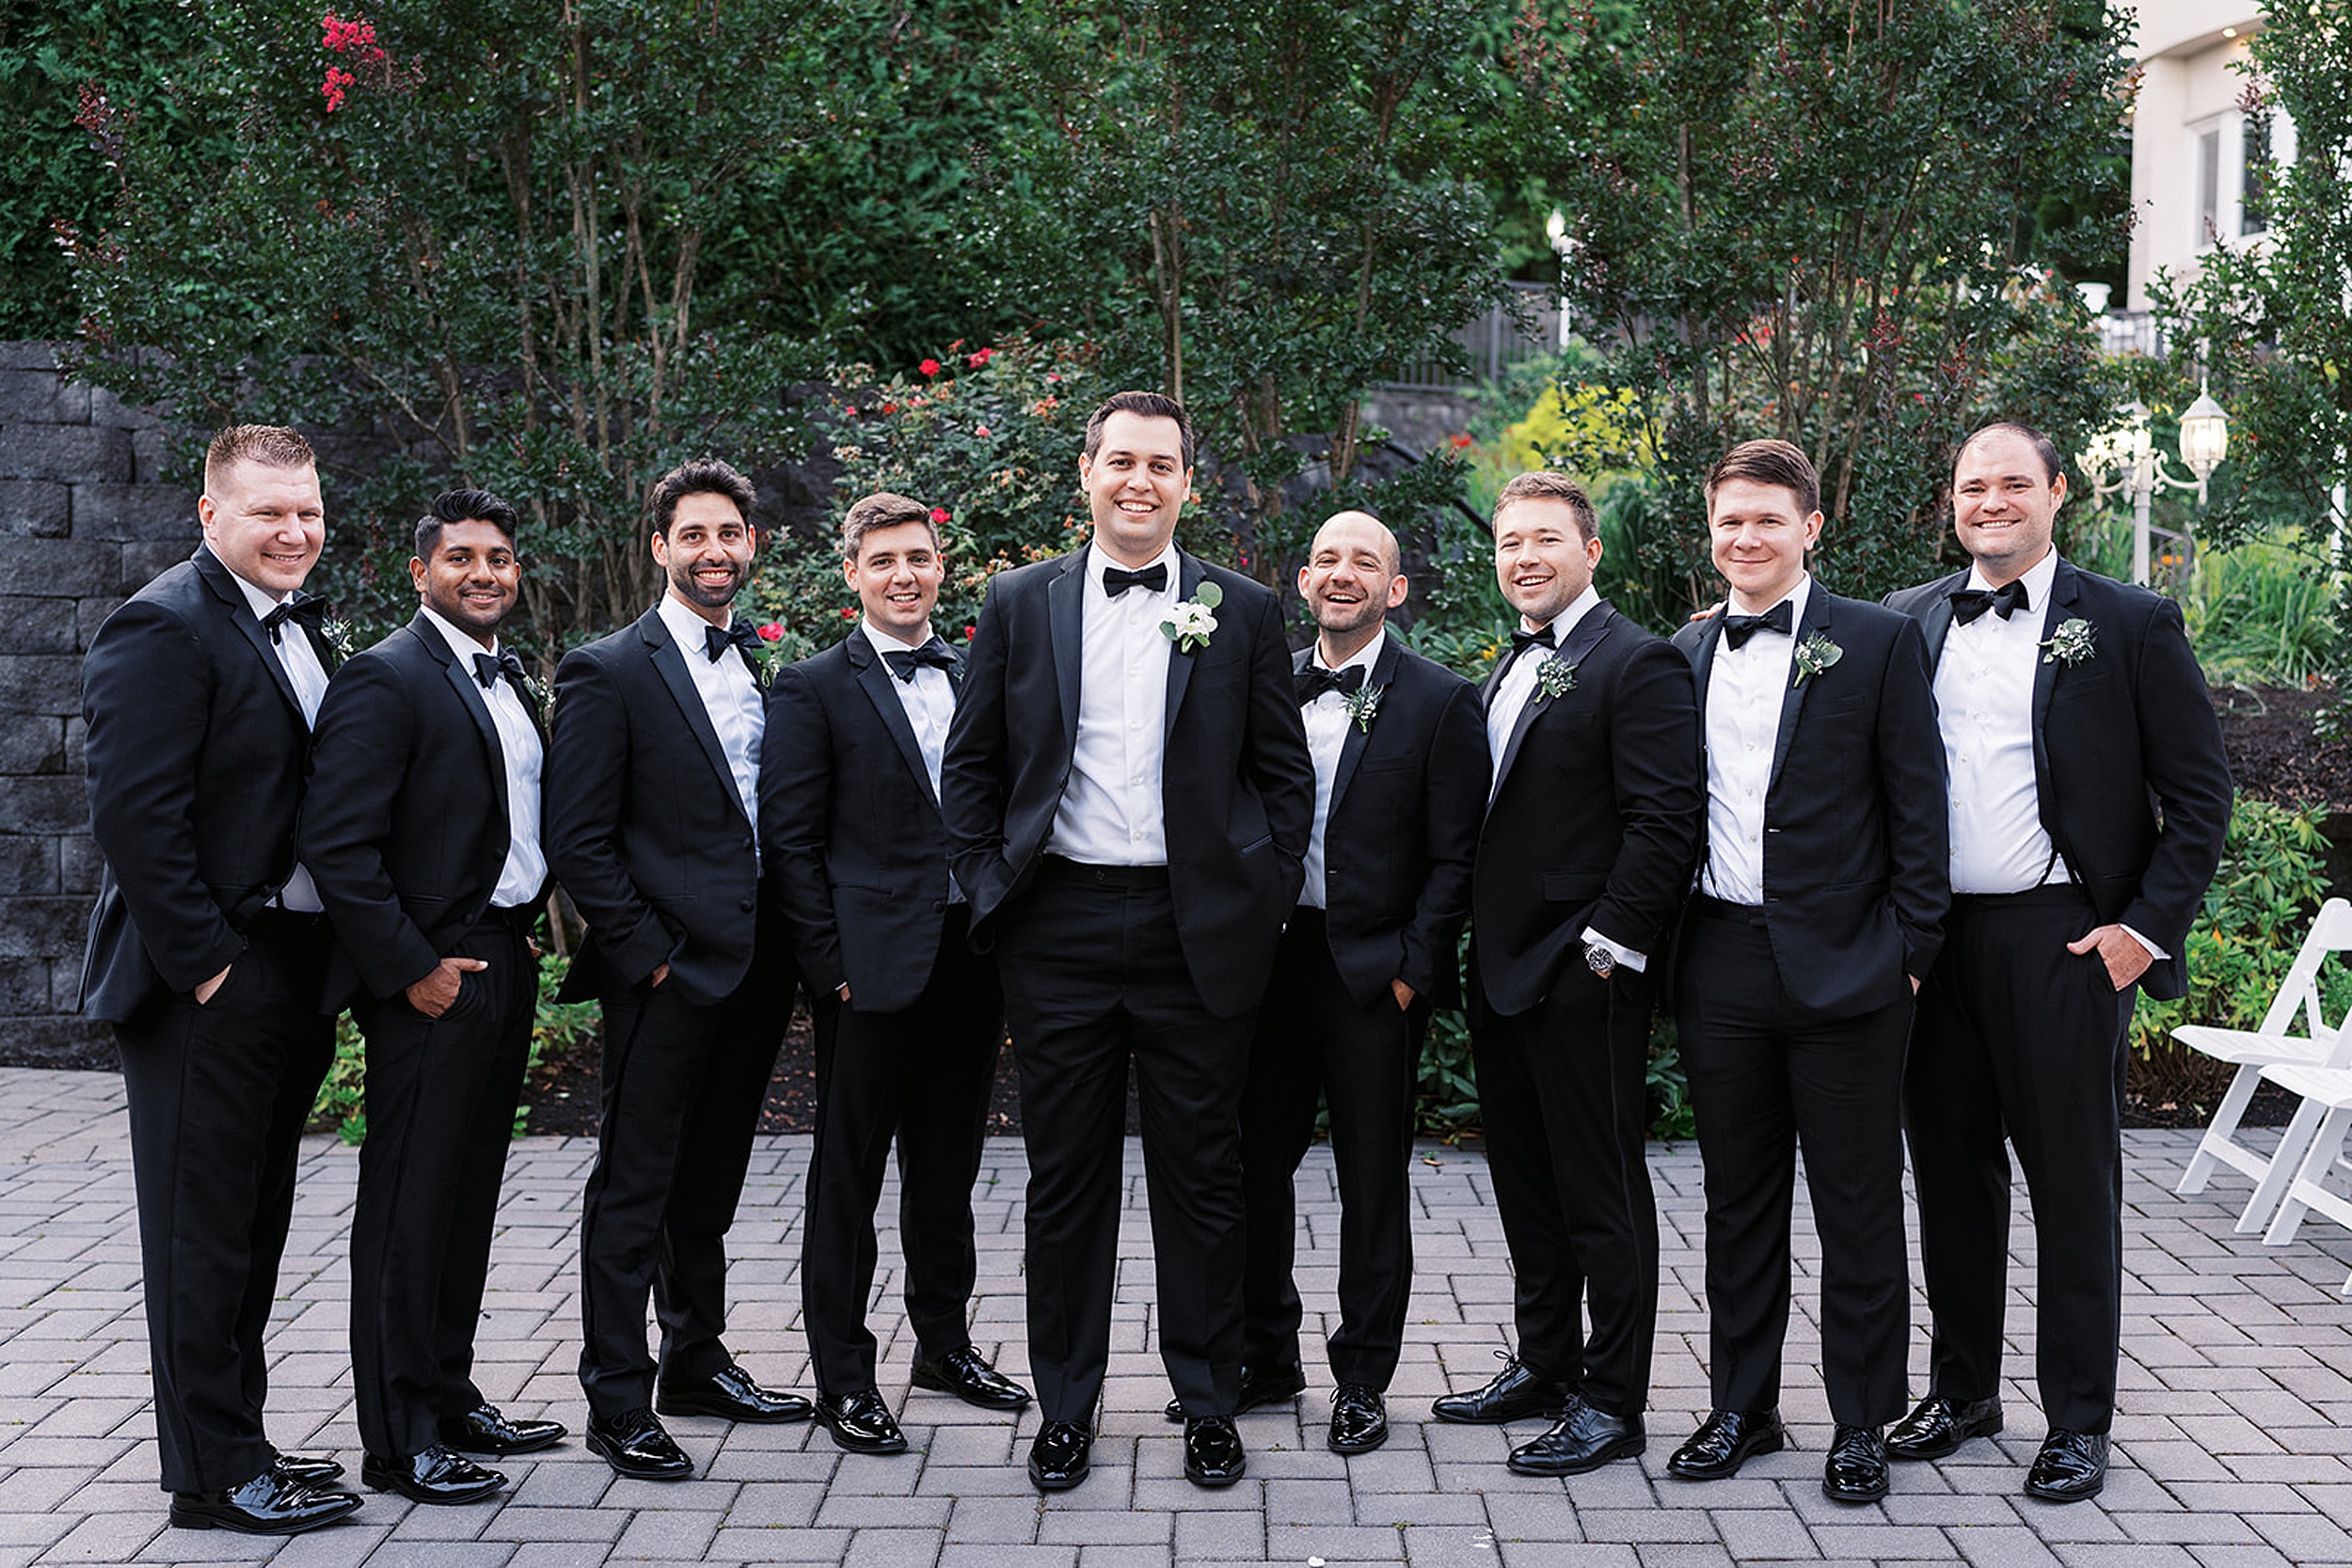 A groom stands in a garden patio surrounded by his groomsmen all in black tuxedos